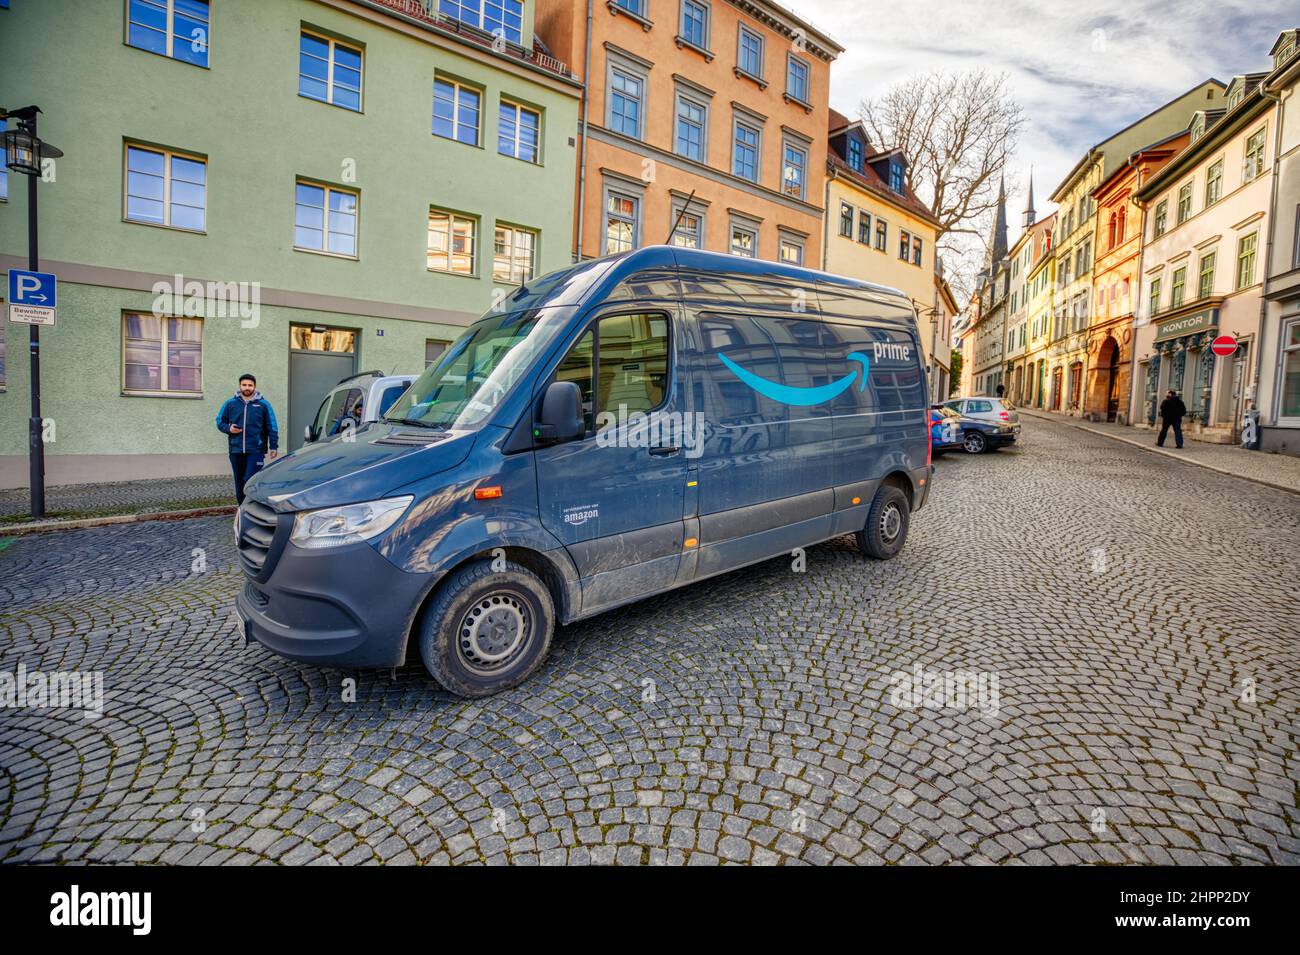 Amazon prime lorry hi-res stock photography and images - Alamy